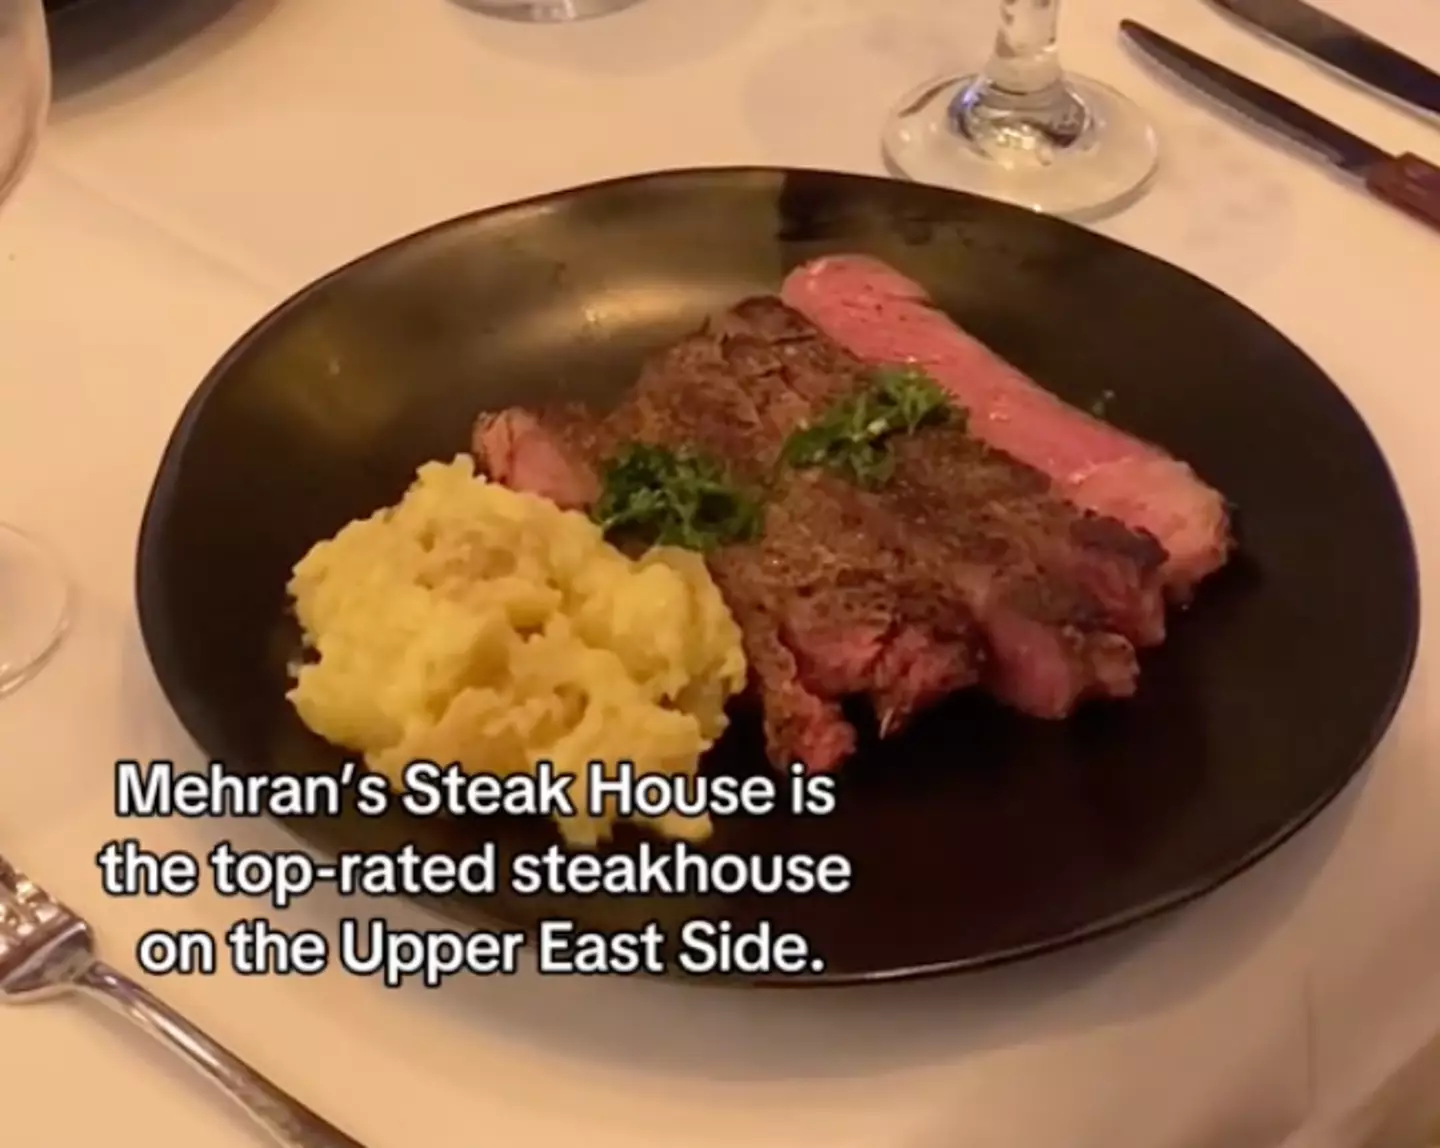 The steakhouse had dozens of glowing reviews.